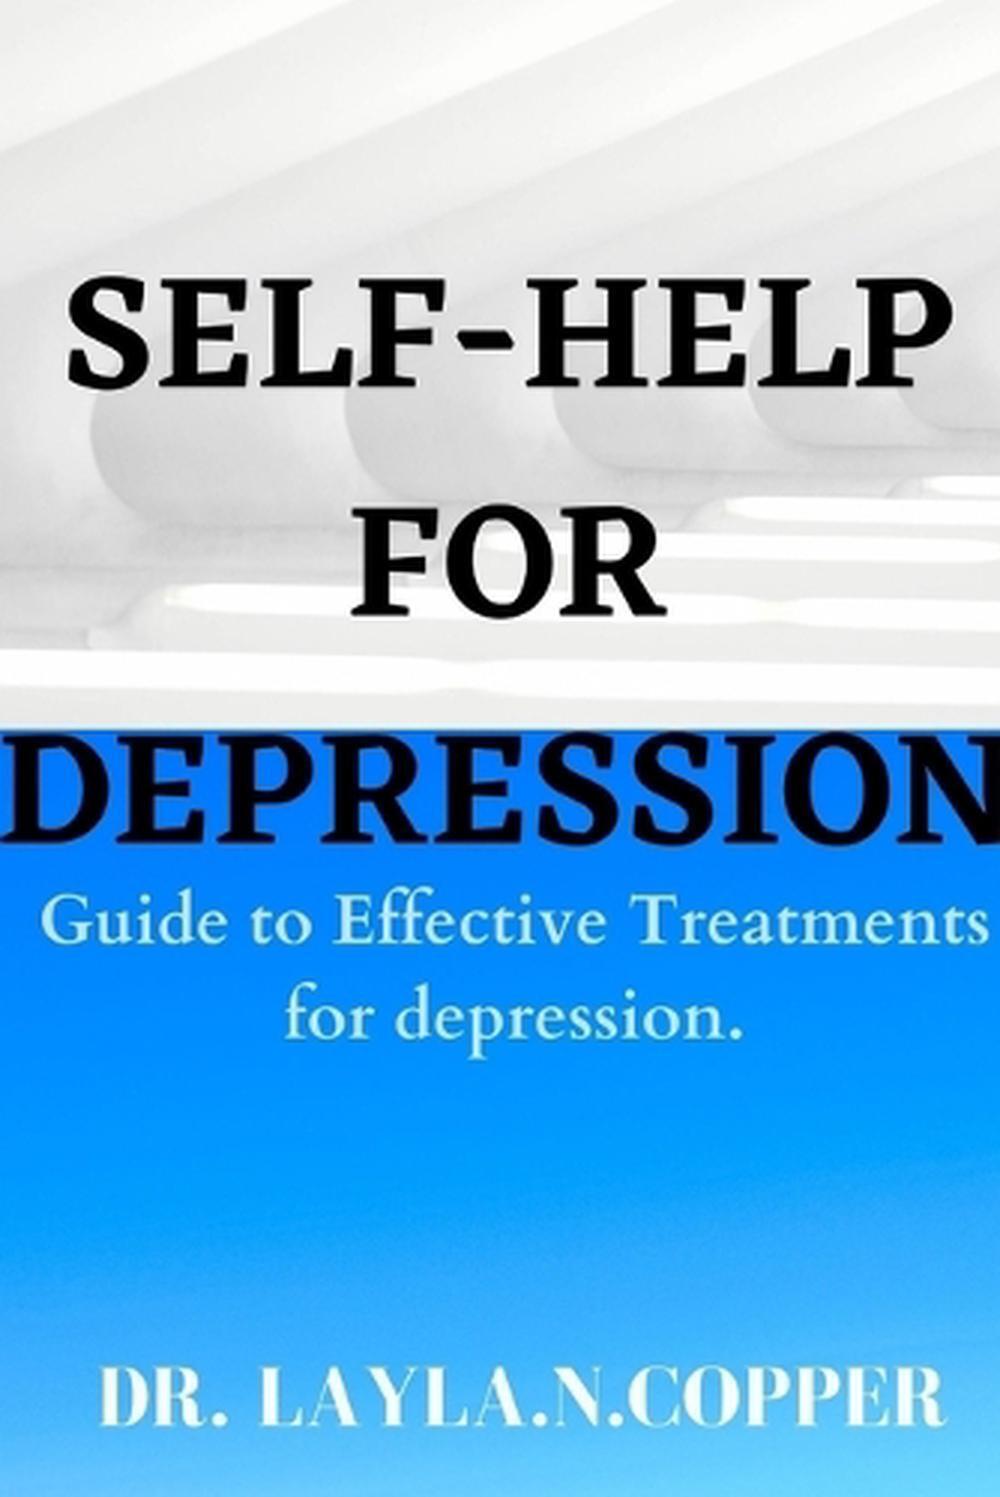 Self Help for Depression: Guide to Effective Treatments for Depression by Dr Lay